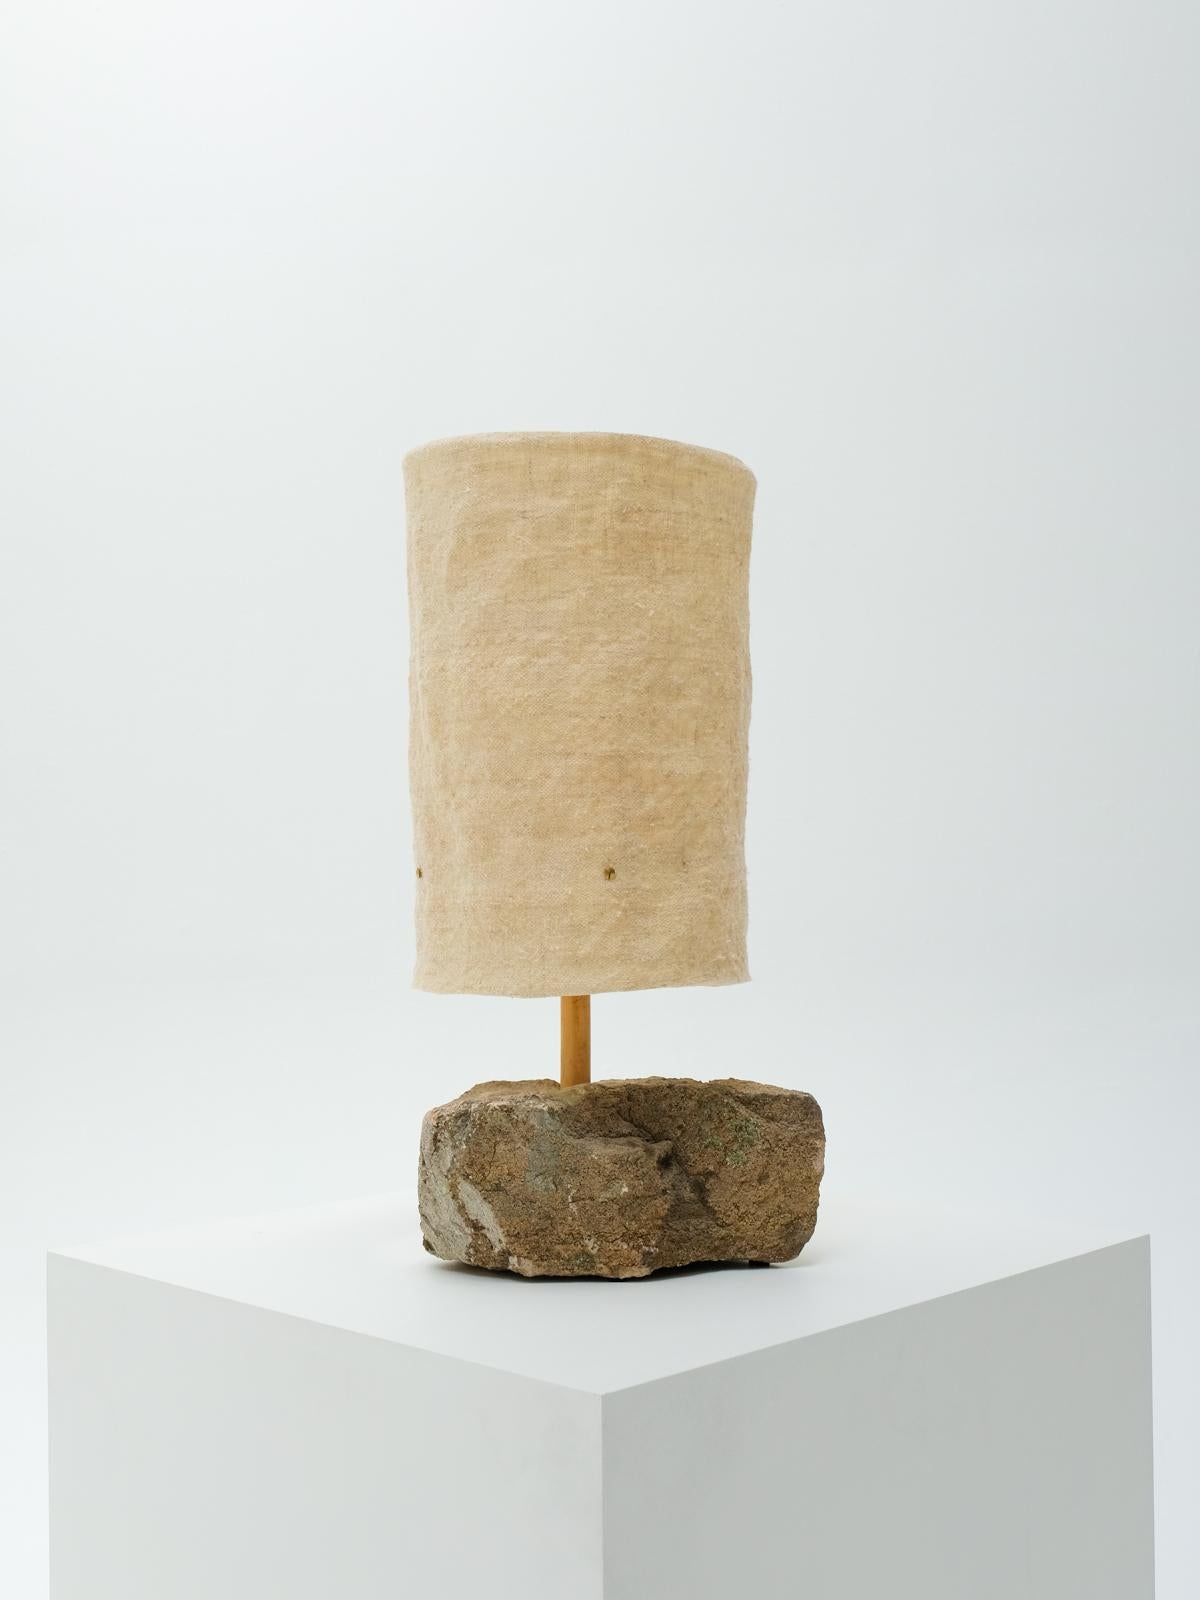 Hjra Table Lamp Large, Handspun, Handwoven wool Lampshade, Made of Rock & Reed For Sale 4